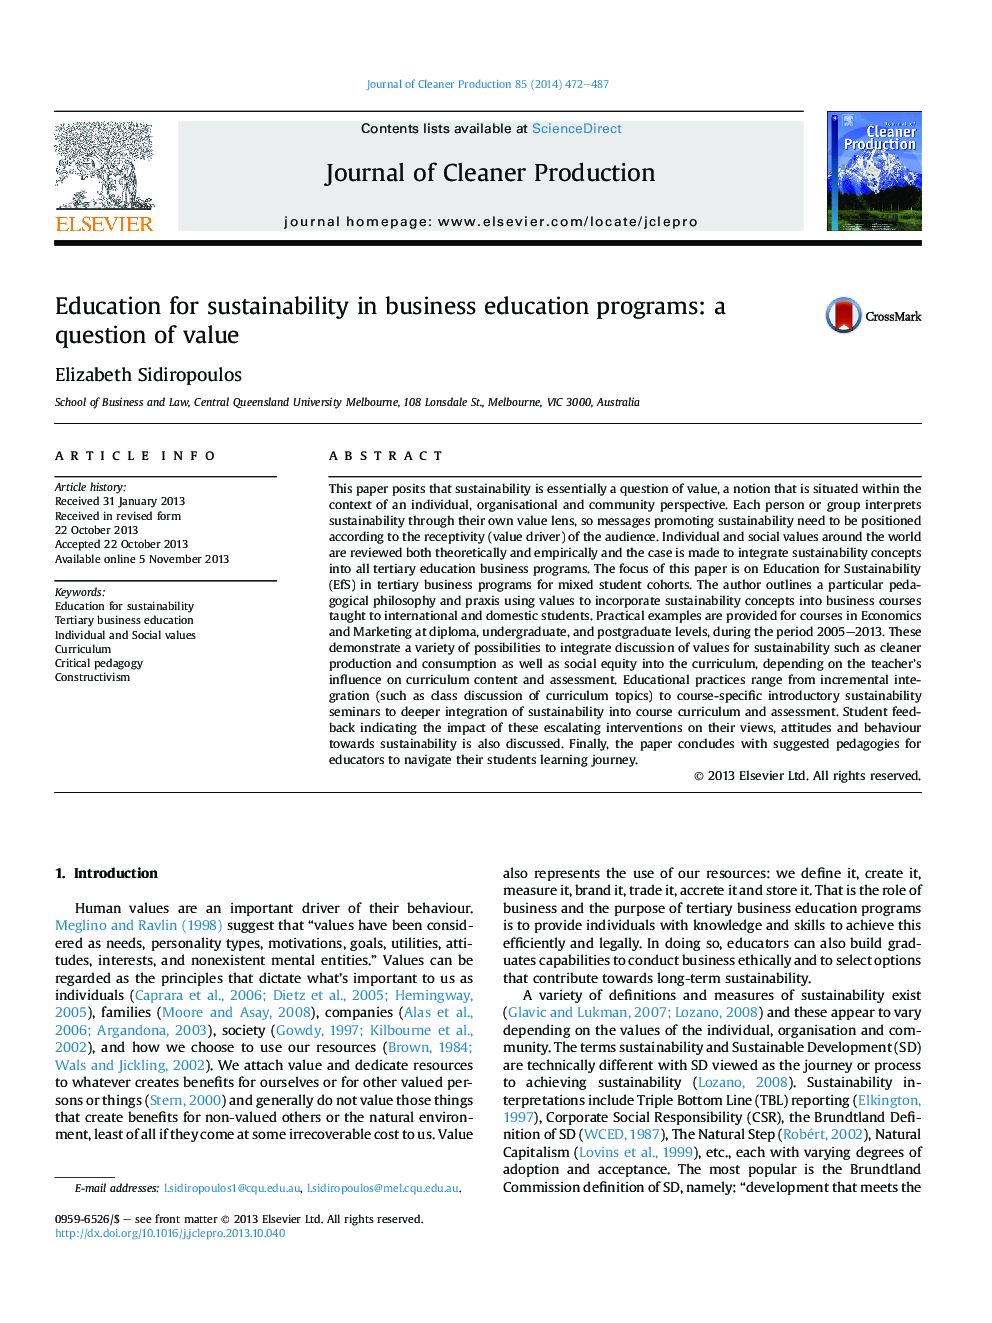 Education for sustainability in business education programs: a question of value